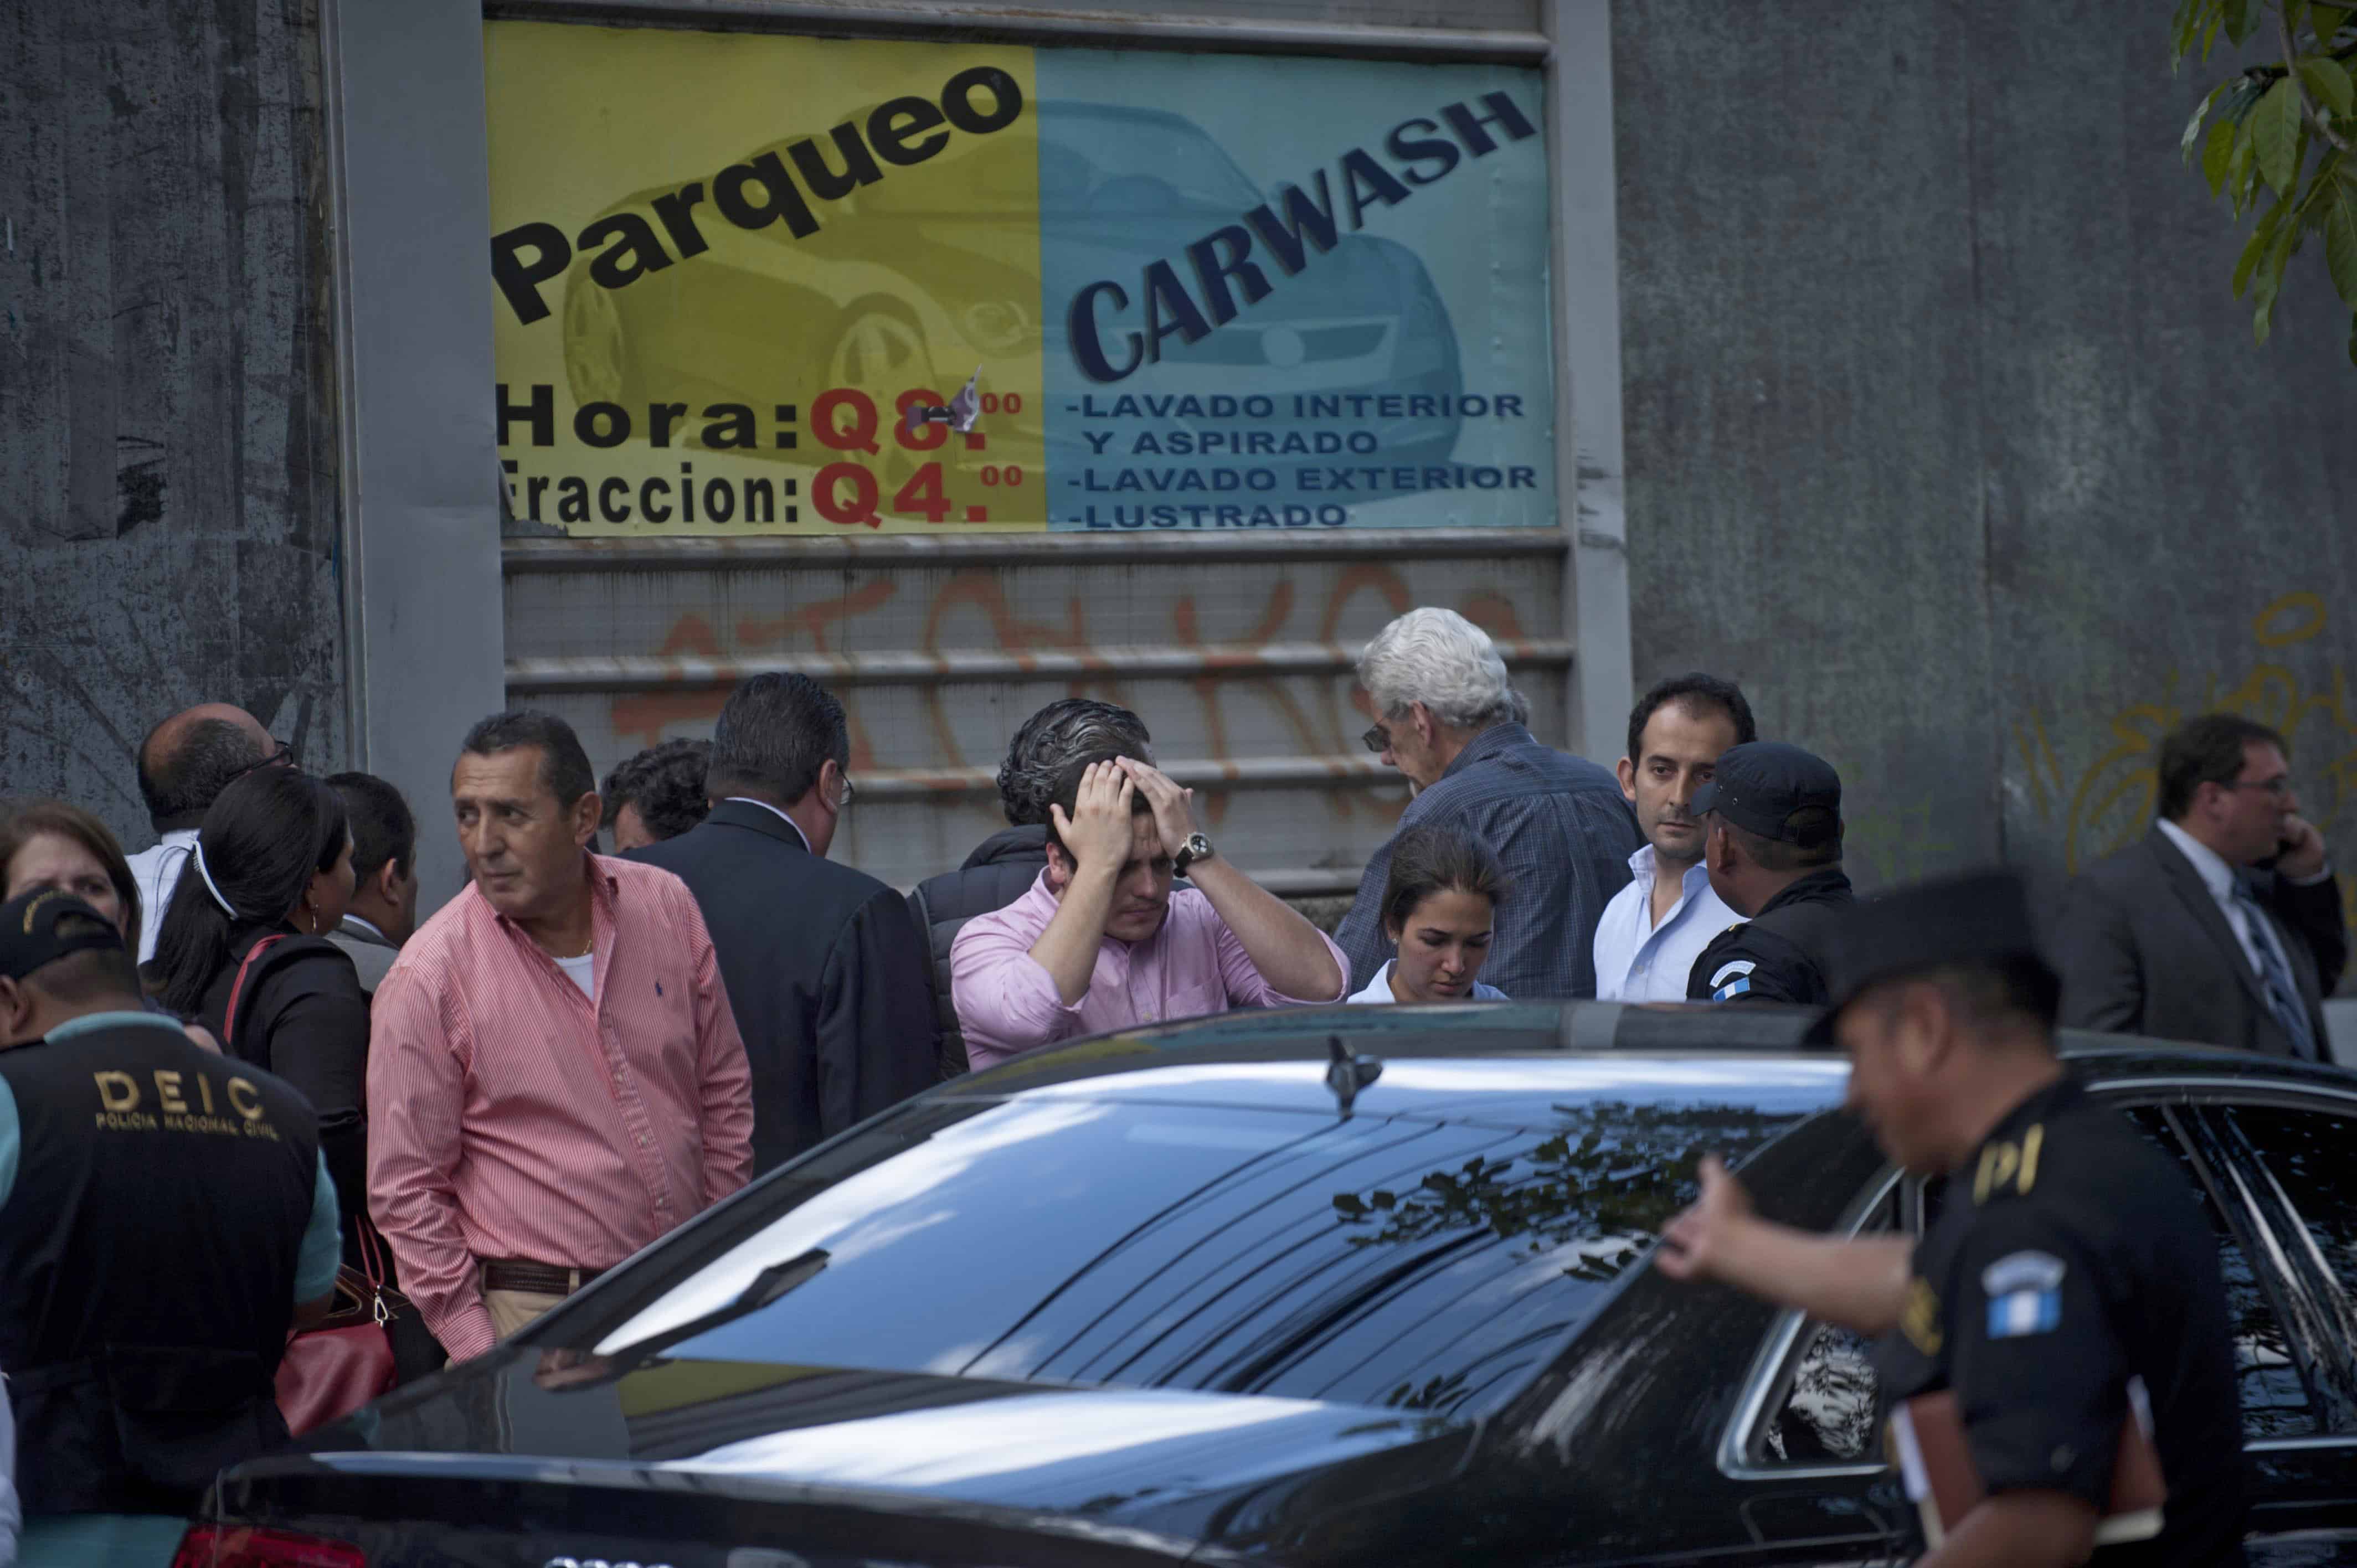 Relatives arrive at the crime scene after Francisco Palomo, an attorney for Guatemala's former dictator Efraín Ríos Montt, was shot dead.